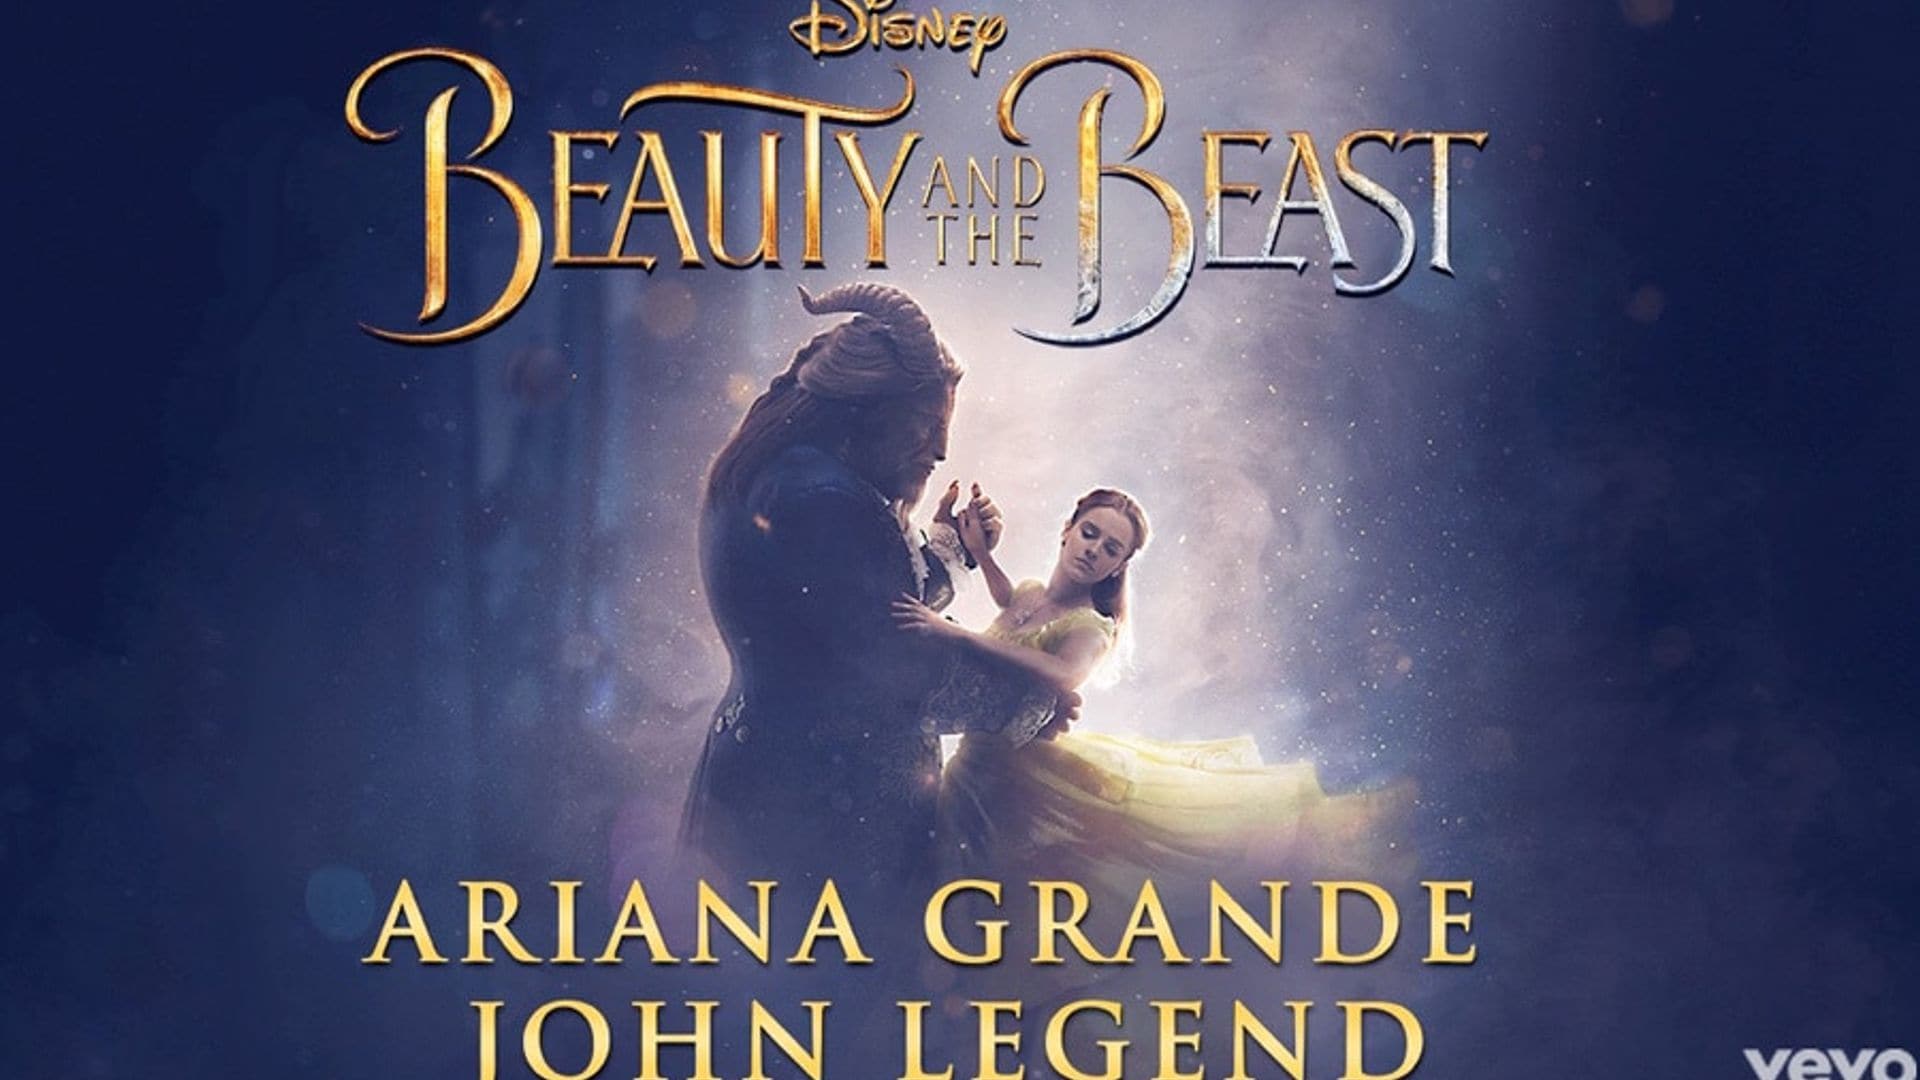 Ariana Grande and John Legend recreated the classic sung by Celine Dion and Peabo Bryson.